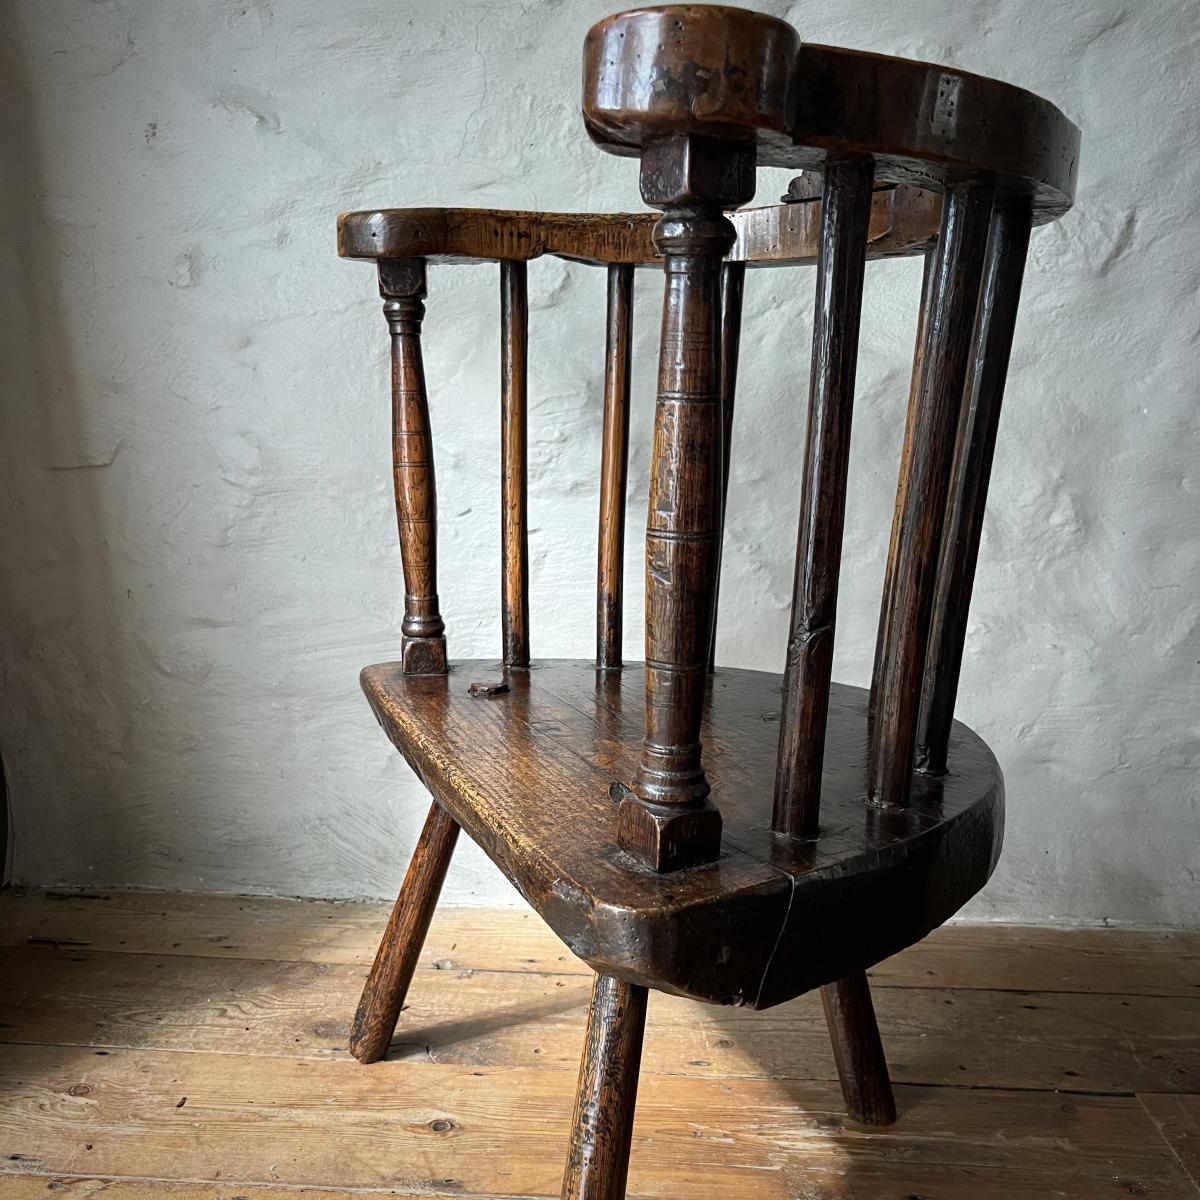 18th century Welsh stick chair